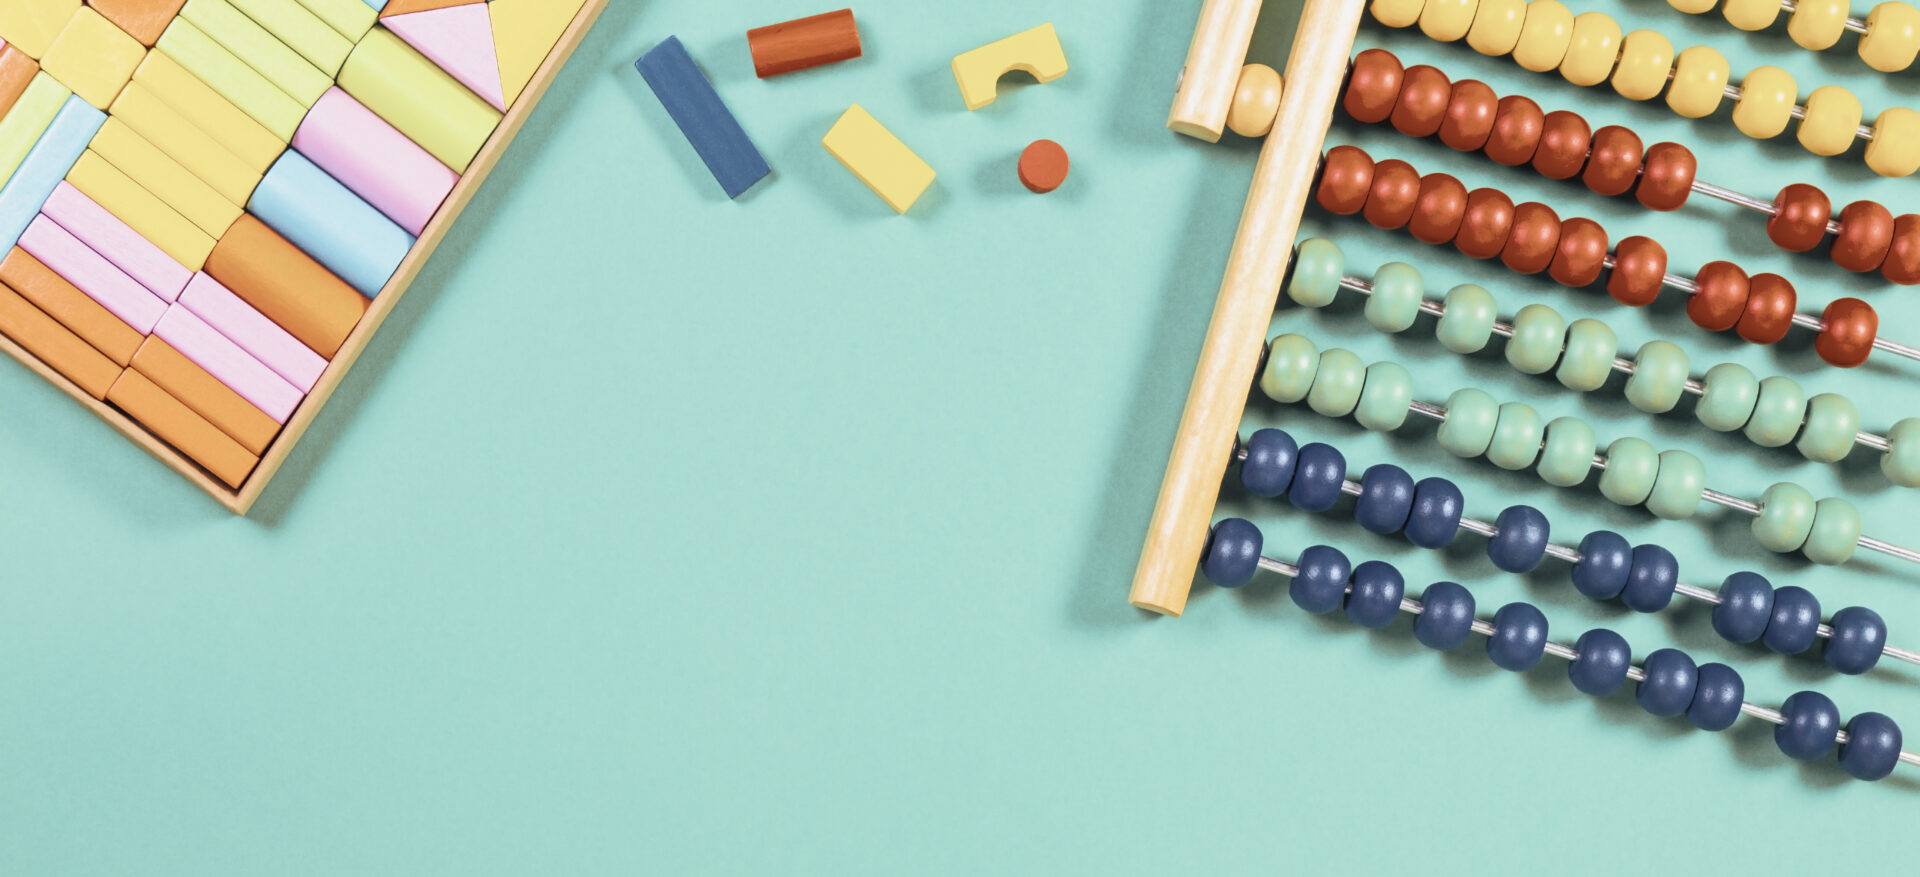 Baby kids toys background. Abacus and wooden cubes on light blue background. Top view.